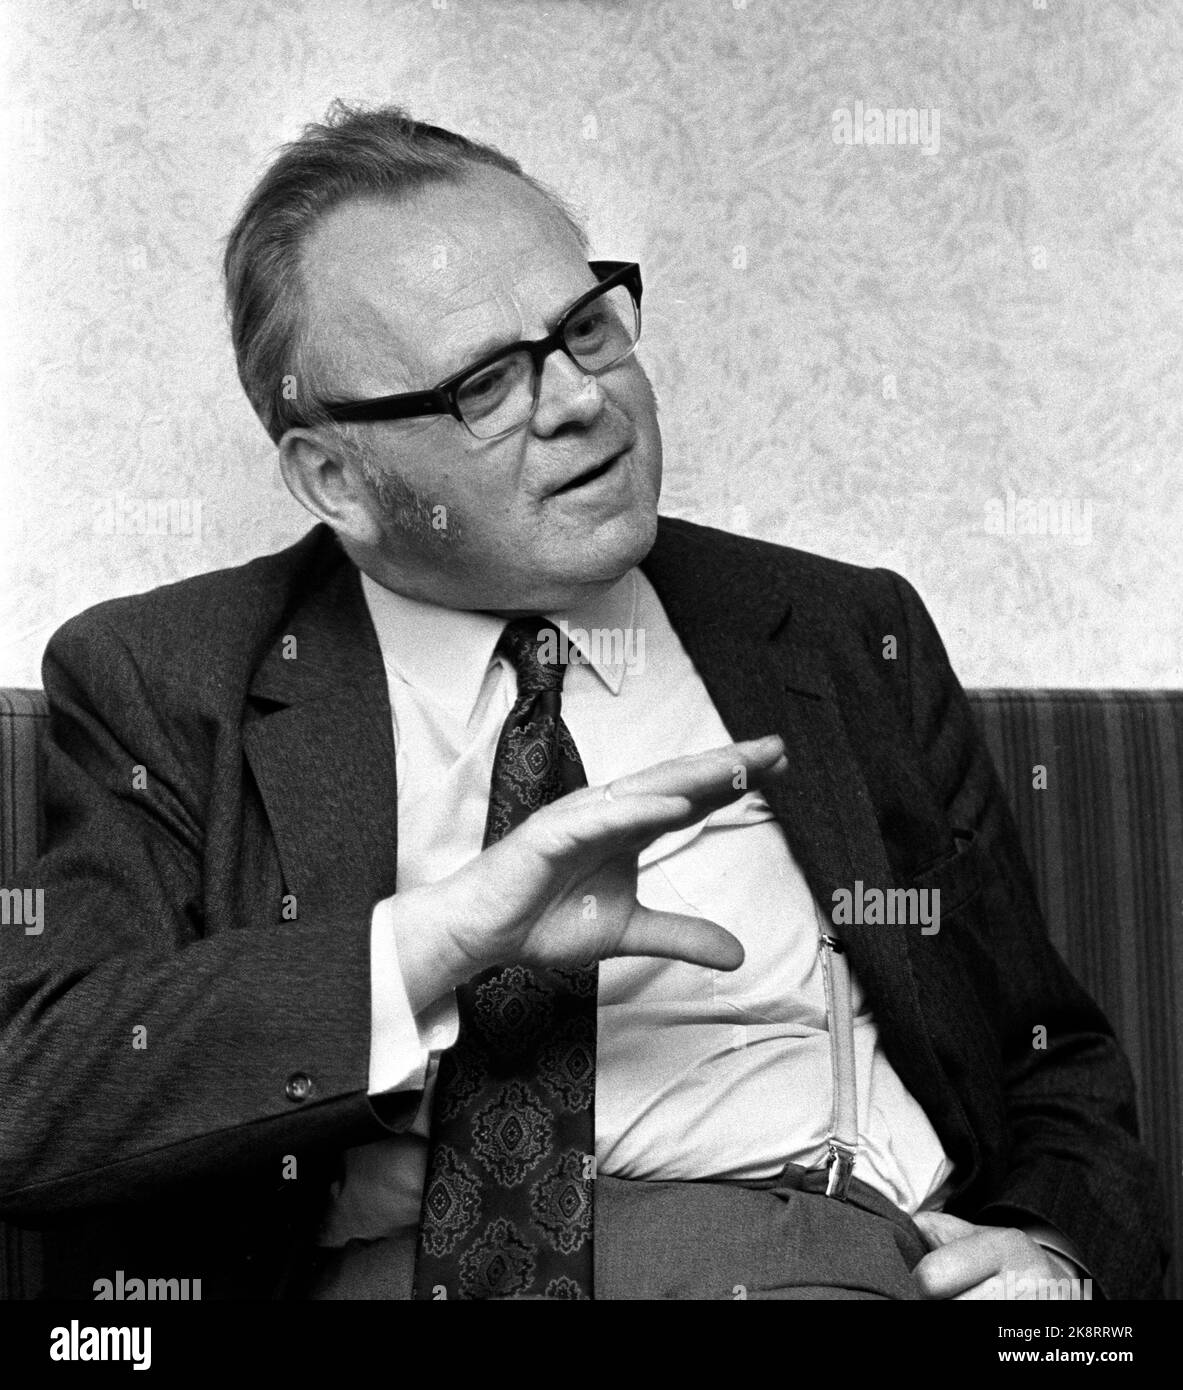 Oslo 19710706 Sverre Hartmann, lawyer, author and state fellow in history. Interview situation. Photo: Hordnes / NTB / NTB Stock Photo